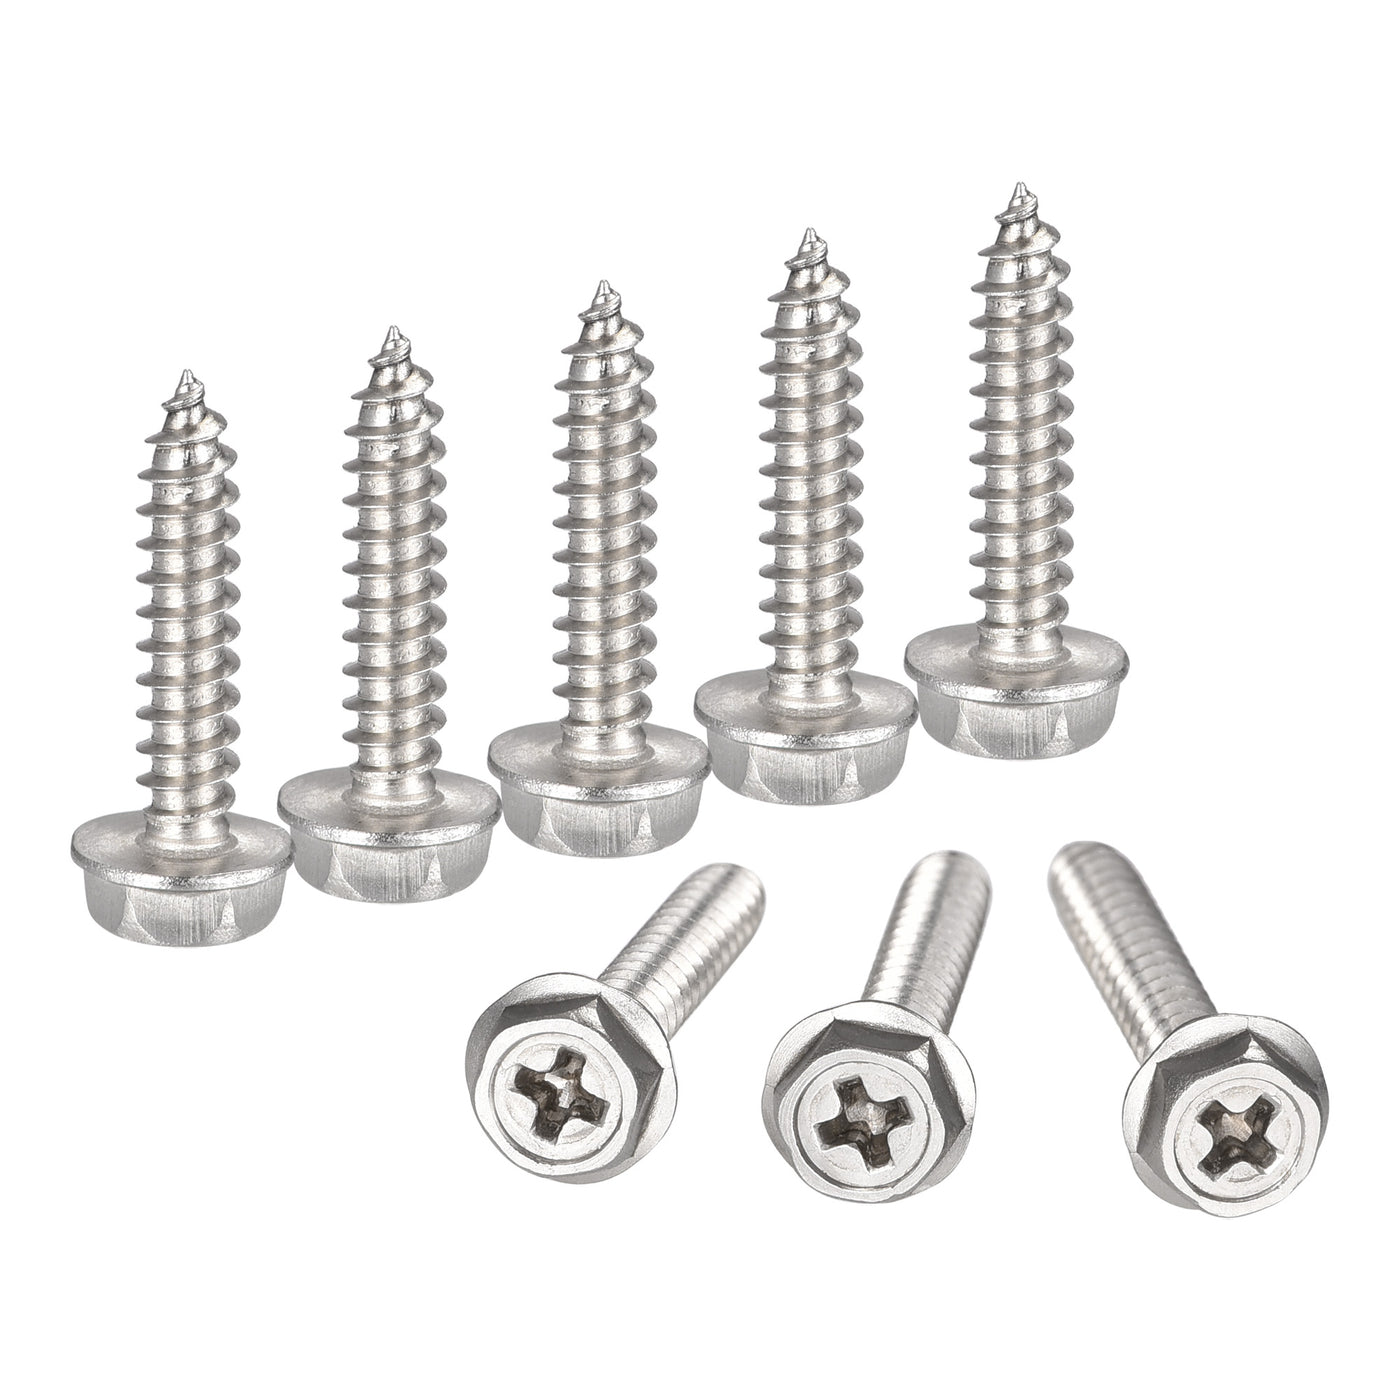 uxcell Uxcell Phillips Hex Washer Self Tapping Screws, M4 x 20mm 304 Stainless Steel Hex Flange Sheet Metal Screw 25pcs